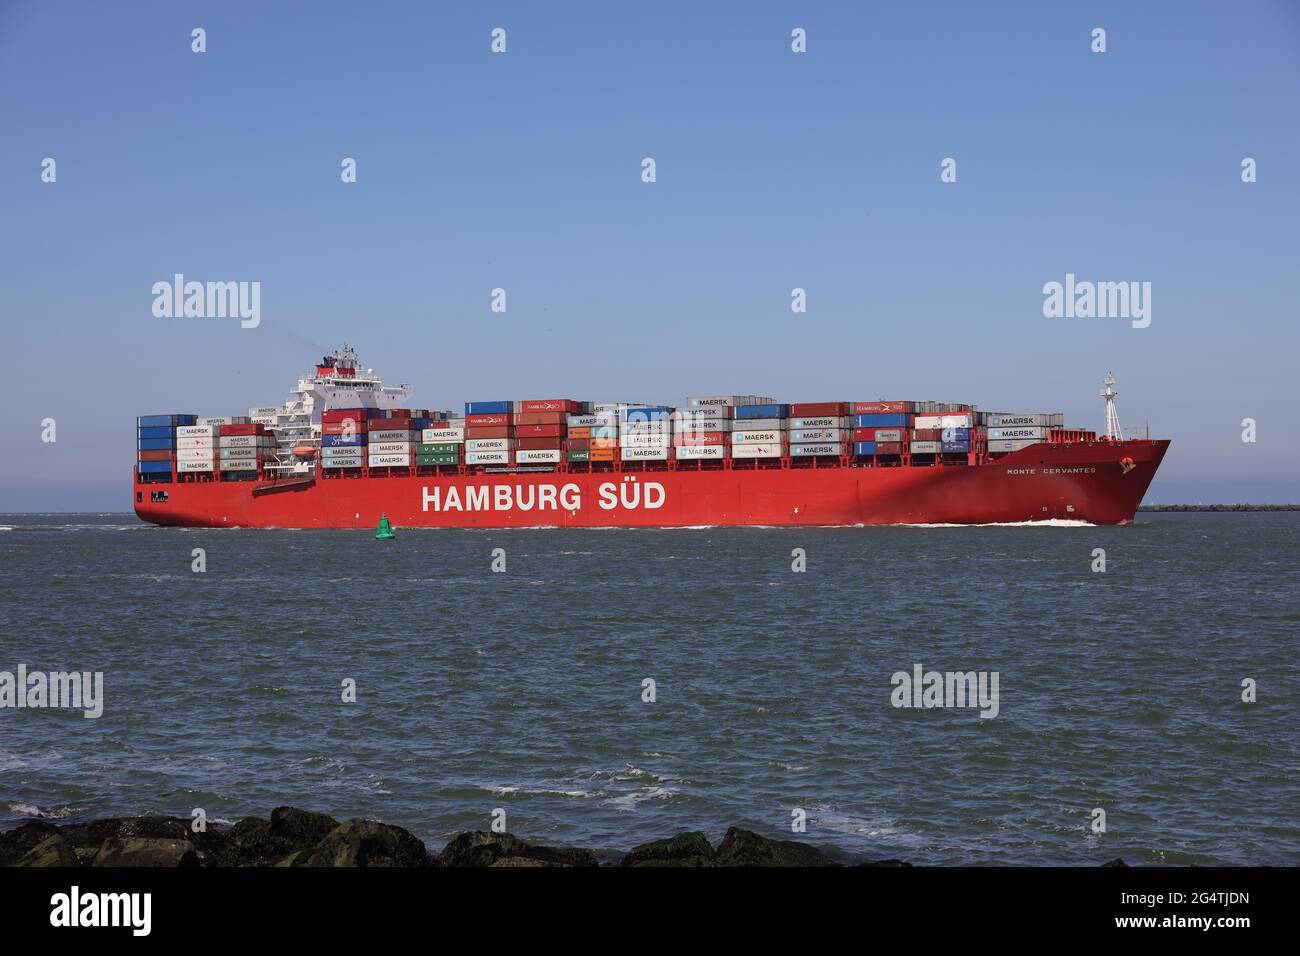 The Brussels Express container ship will be unloaded in the port of Rotterdam on May 29, 2021. Stock Photo